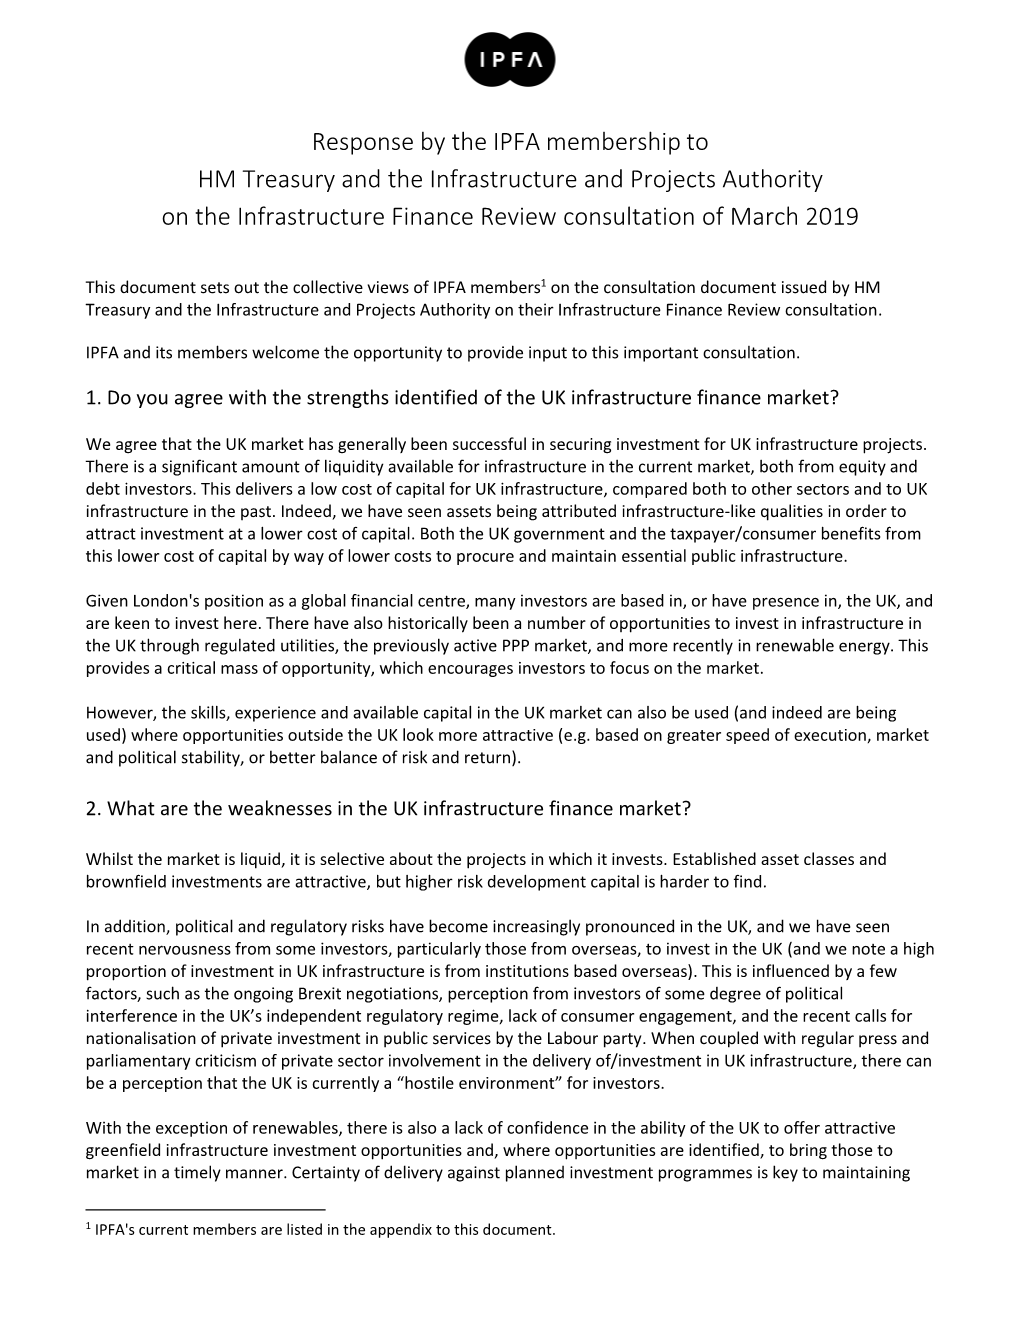 Response by the IPFA Membership to HM Treasury and the Infrastructure and Projects Authority on the Infrastructure Finance Review Consultation of March 2019